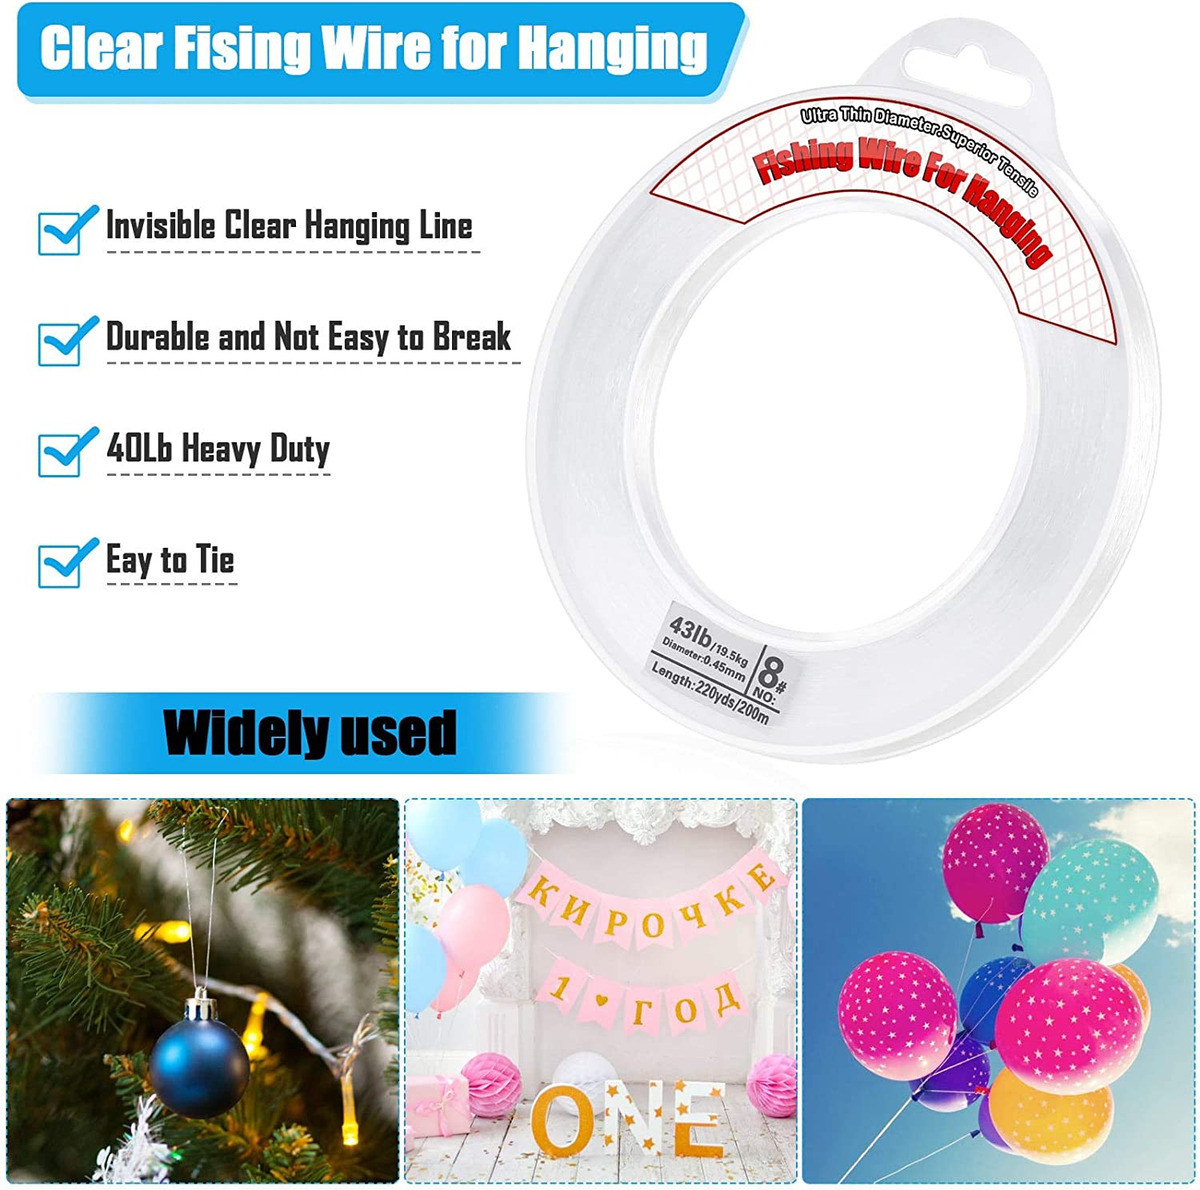 Clear Fishing Wire, 656FT Fishing Line Clear Invisible Hanging Wire Stro